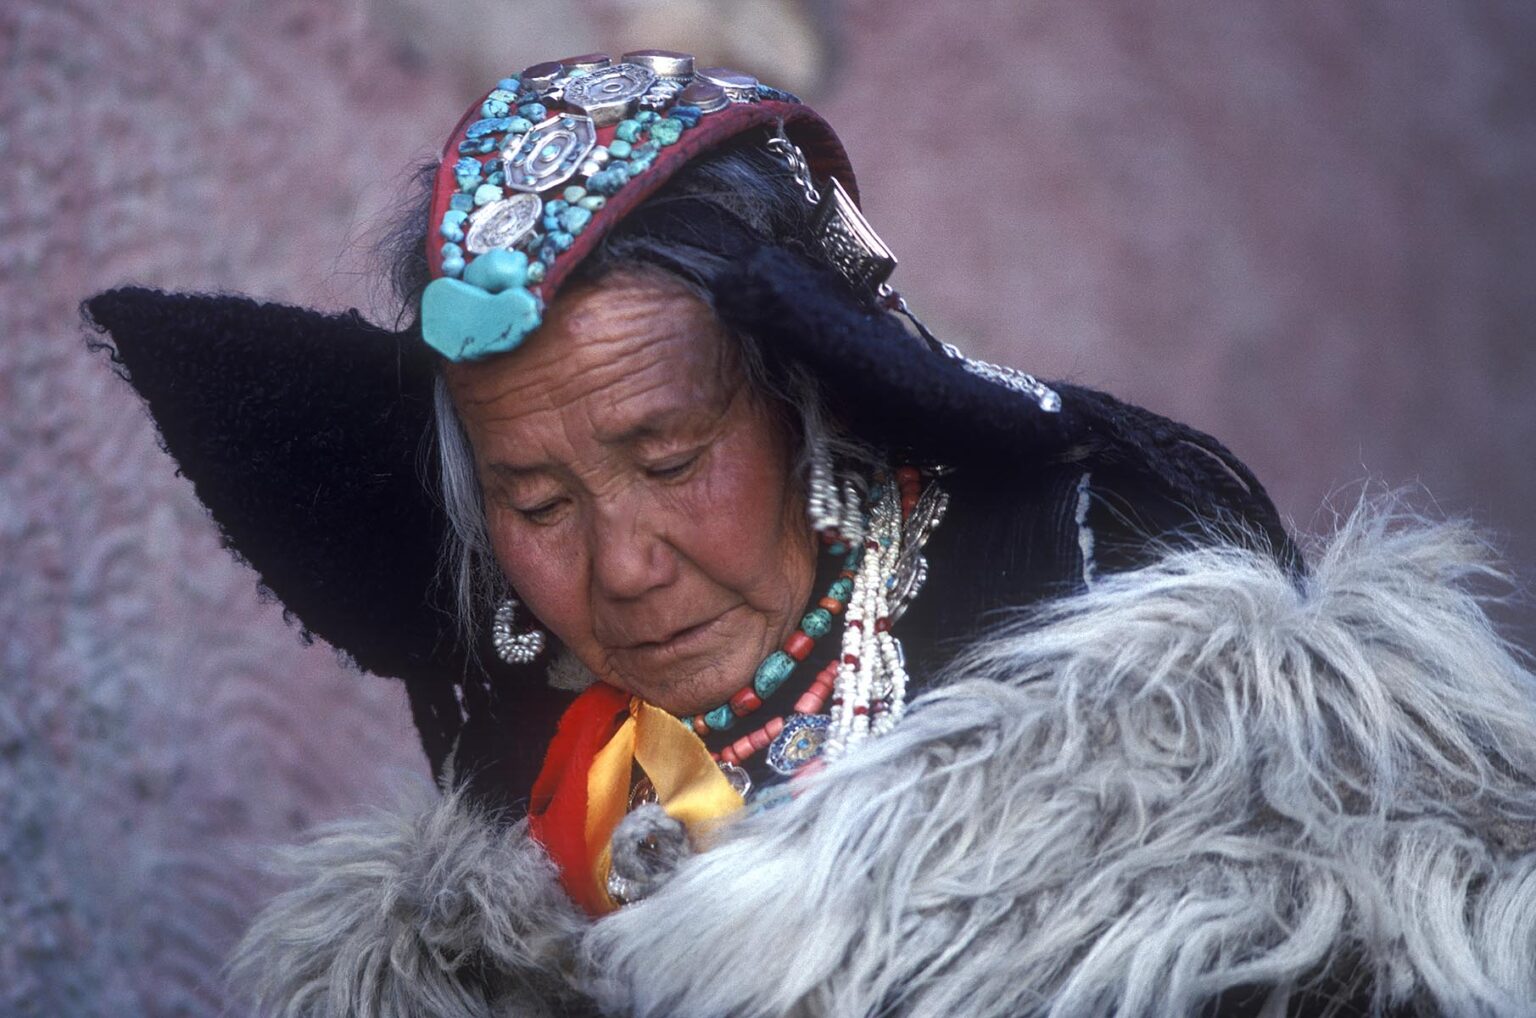 LADAKHI WOMAN showing familial wealth via her PERAK, traditional head piece of silver, coral and TURQUOISE - LADAKH, INDIA